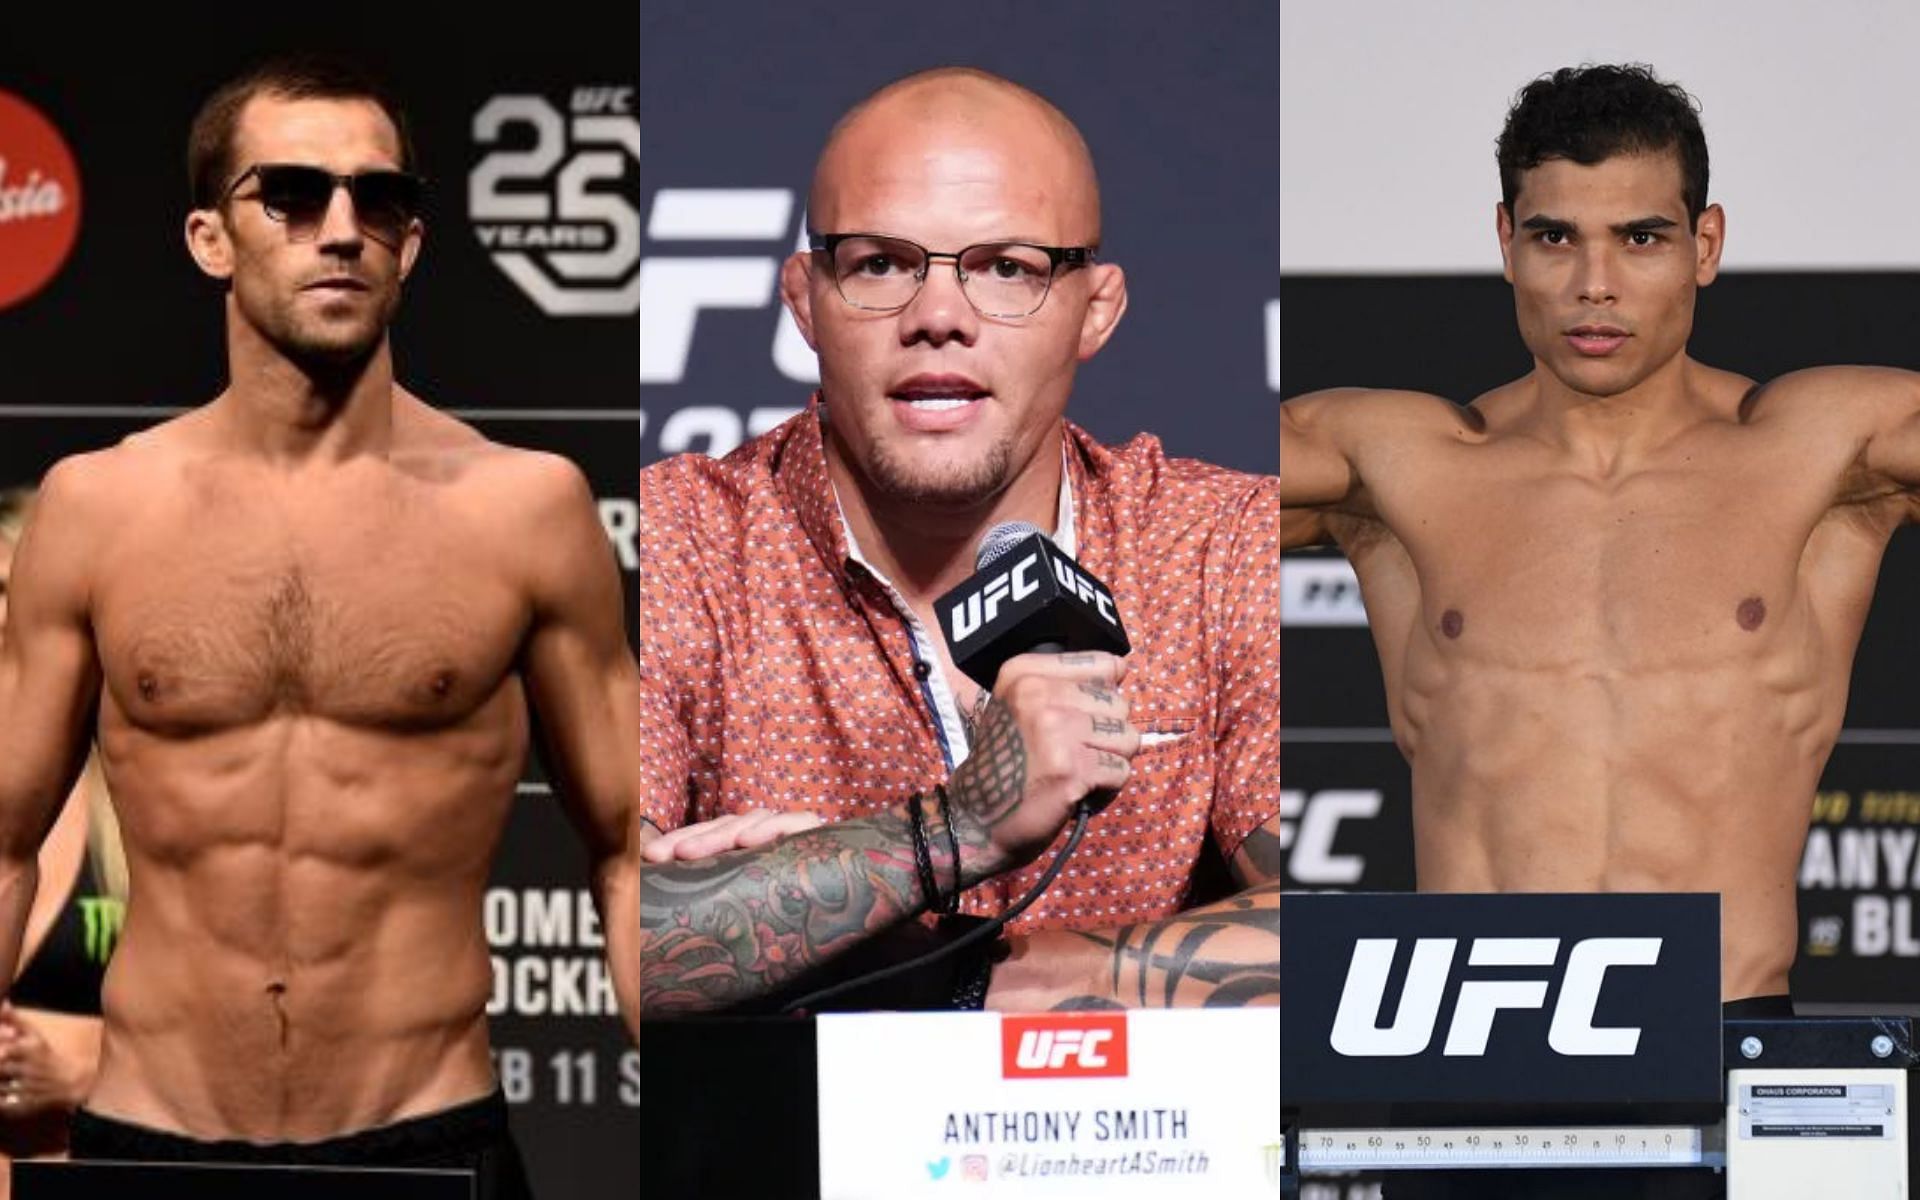 Luke Rockhold (left. Image credit: UFC.com), Anthony Smith (middle. Image credit: Josh Hedges via Getty Images), Paulo Costa (right. Image credit: Zuffa LLC via Getty Images)